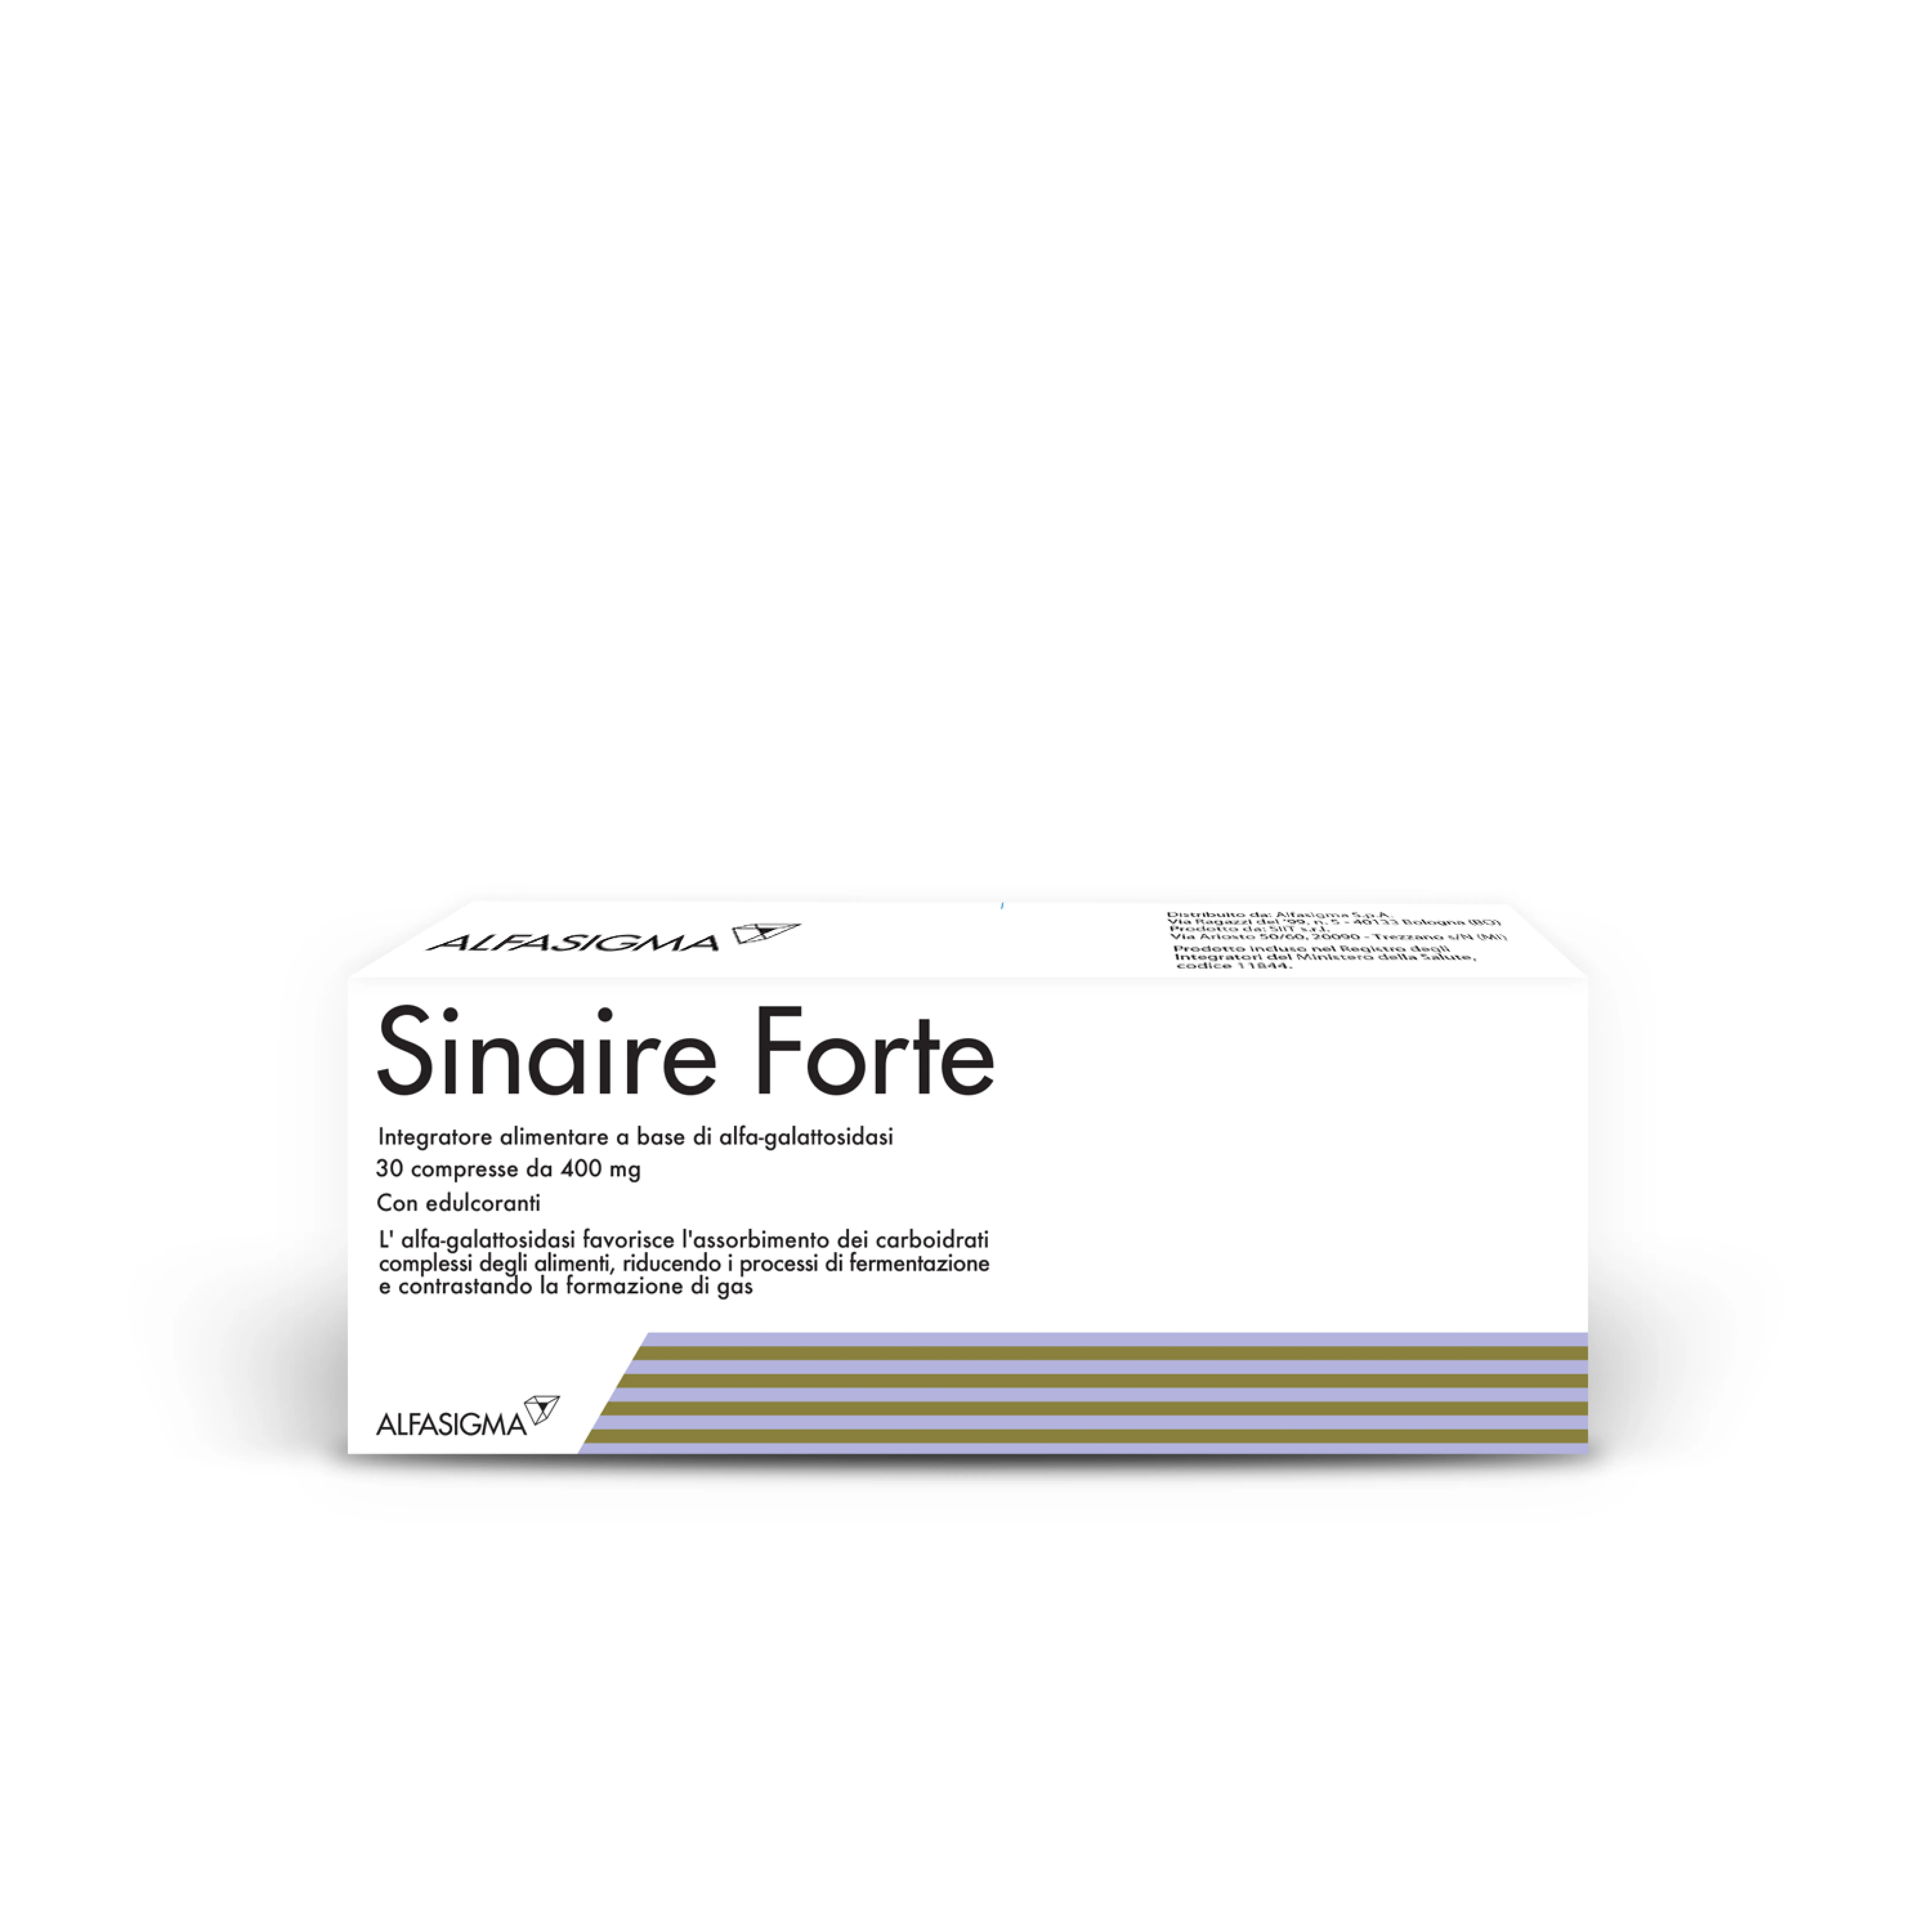 SINAIRE FORTE 30CPR